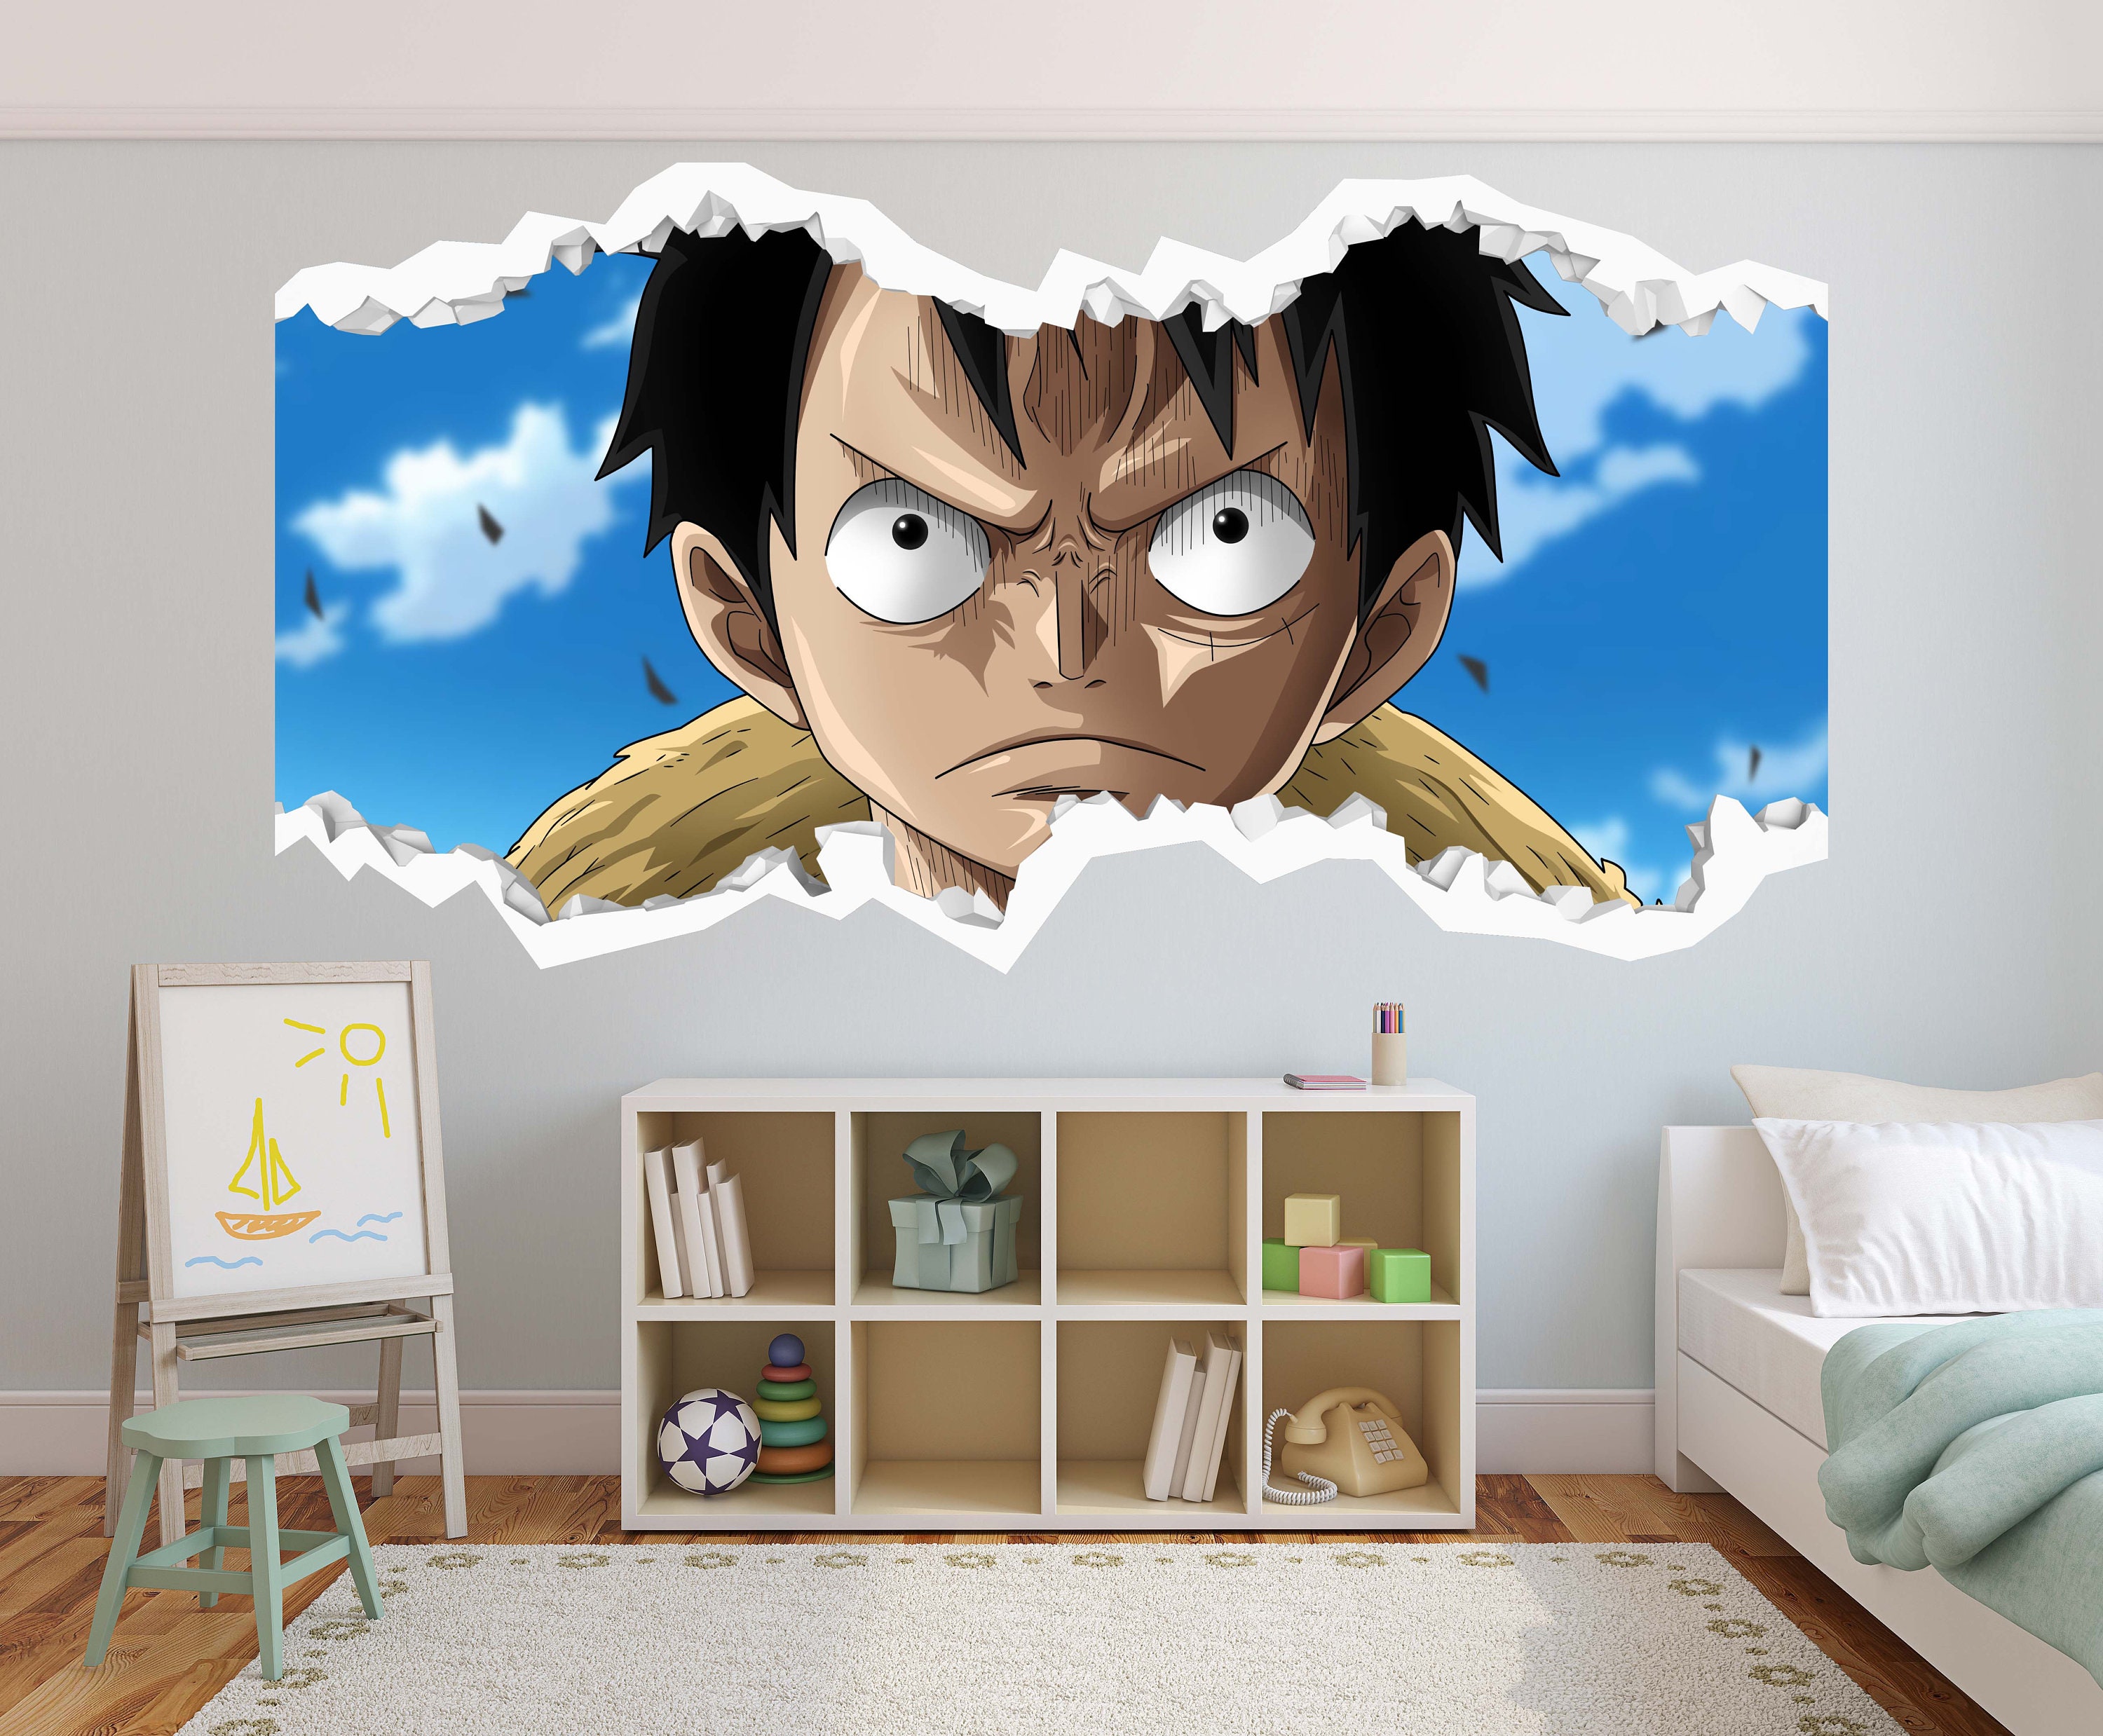 Approach home Decor 60 cm anime wall sticker Self Adhesive Sticker Price in  India  Buy Approach home Decor 60 cm anime wall sticker Self Adhesive  Sticker online at Flipkartcom